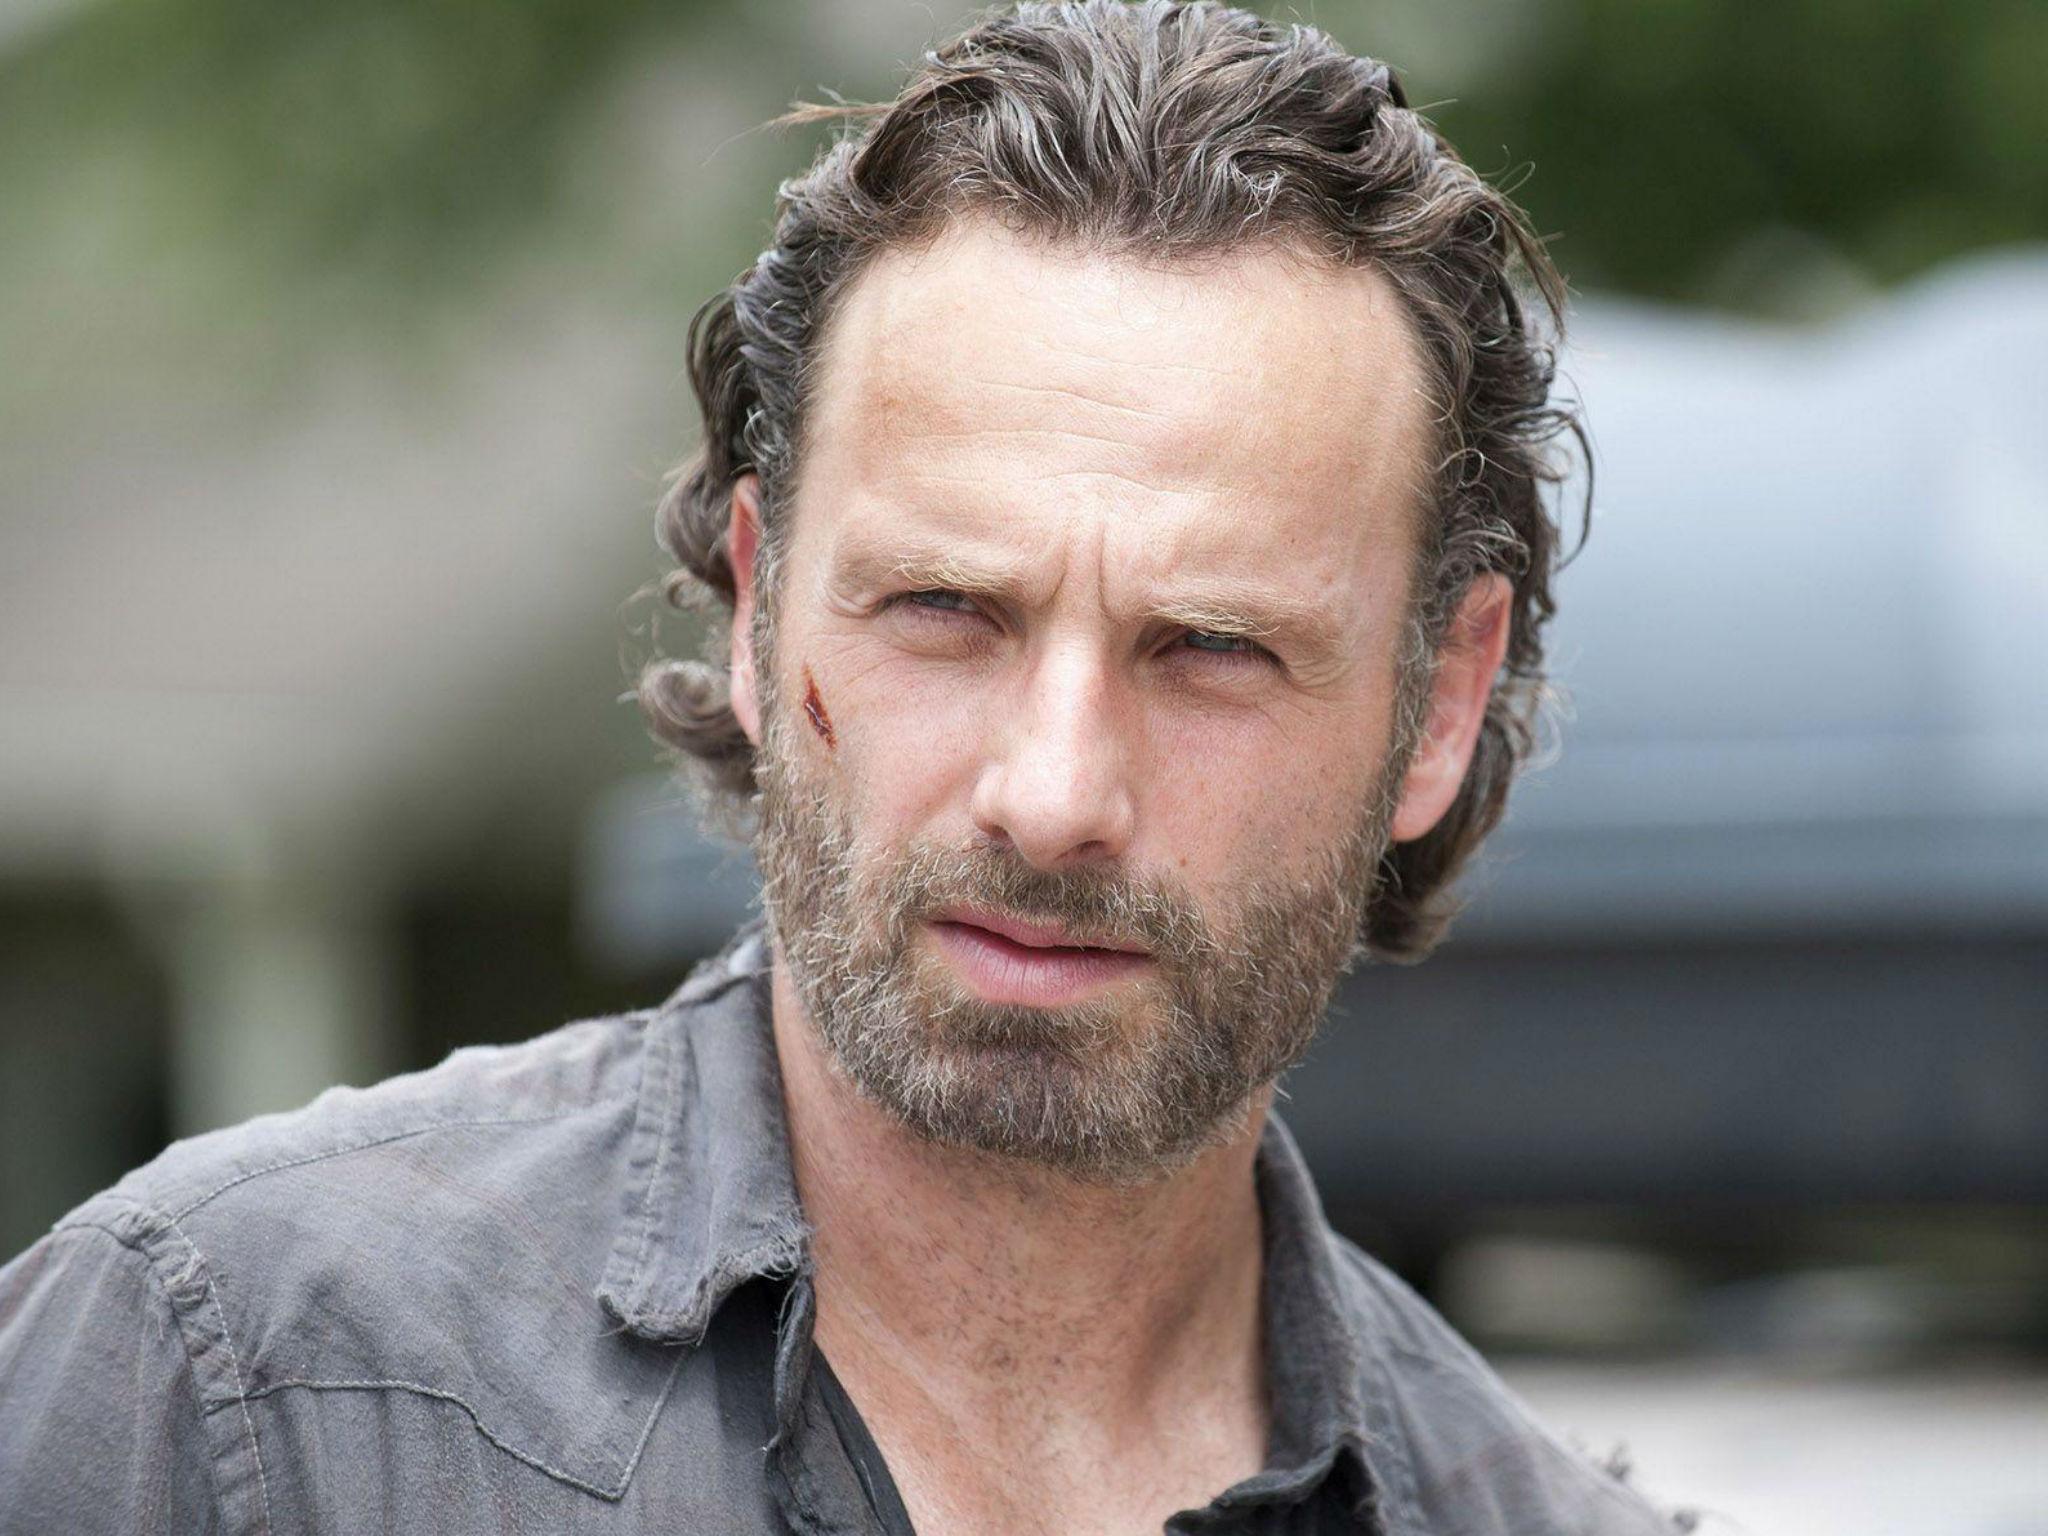 Andrew Lincoln leaving 'The Walking Dead'. Hollywood News Source